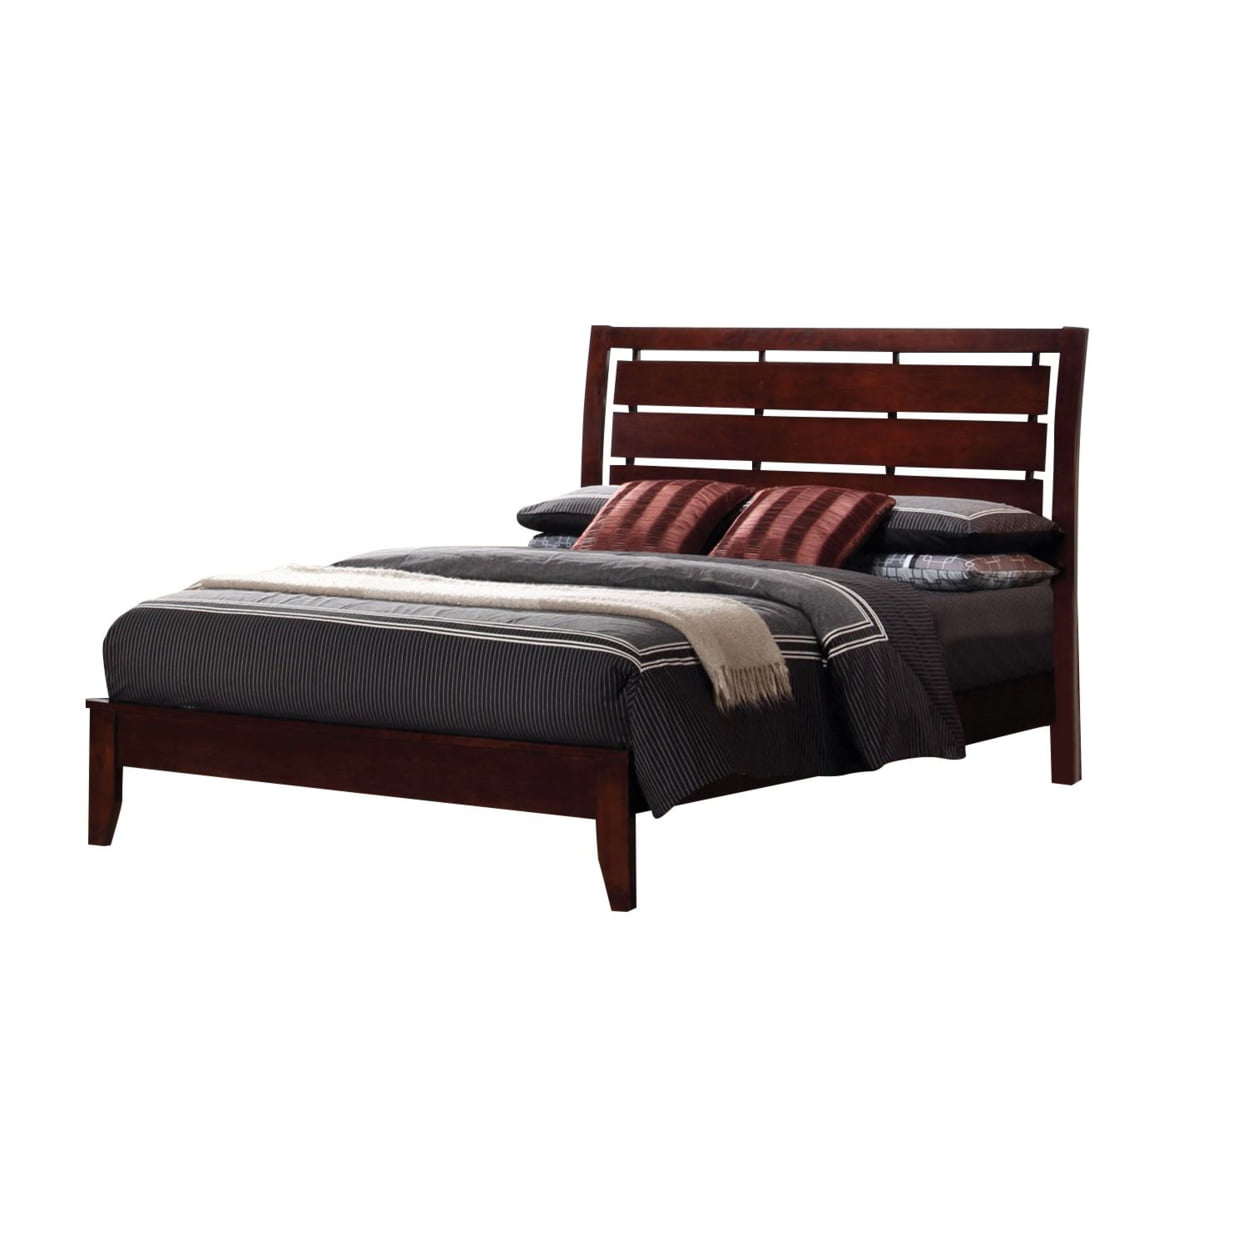 BM208182 Transitional Wooden Queen Size Bed with Slatted Style Headboard, Brown -  Benzara